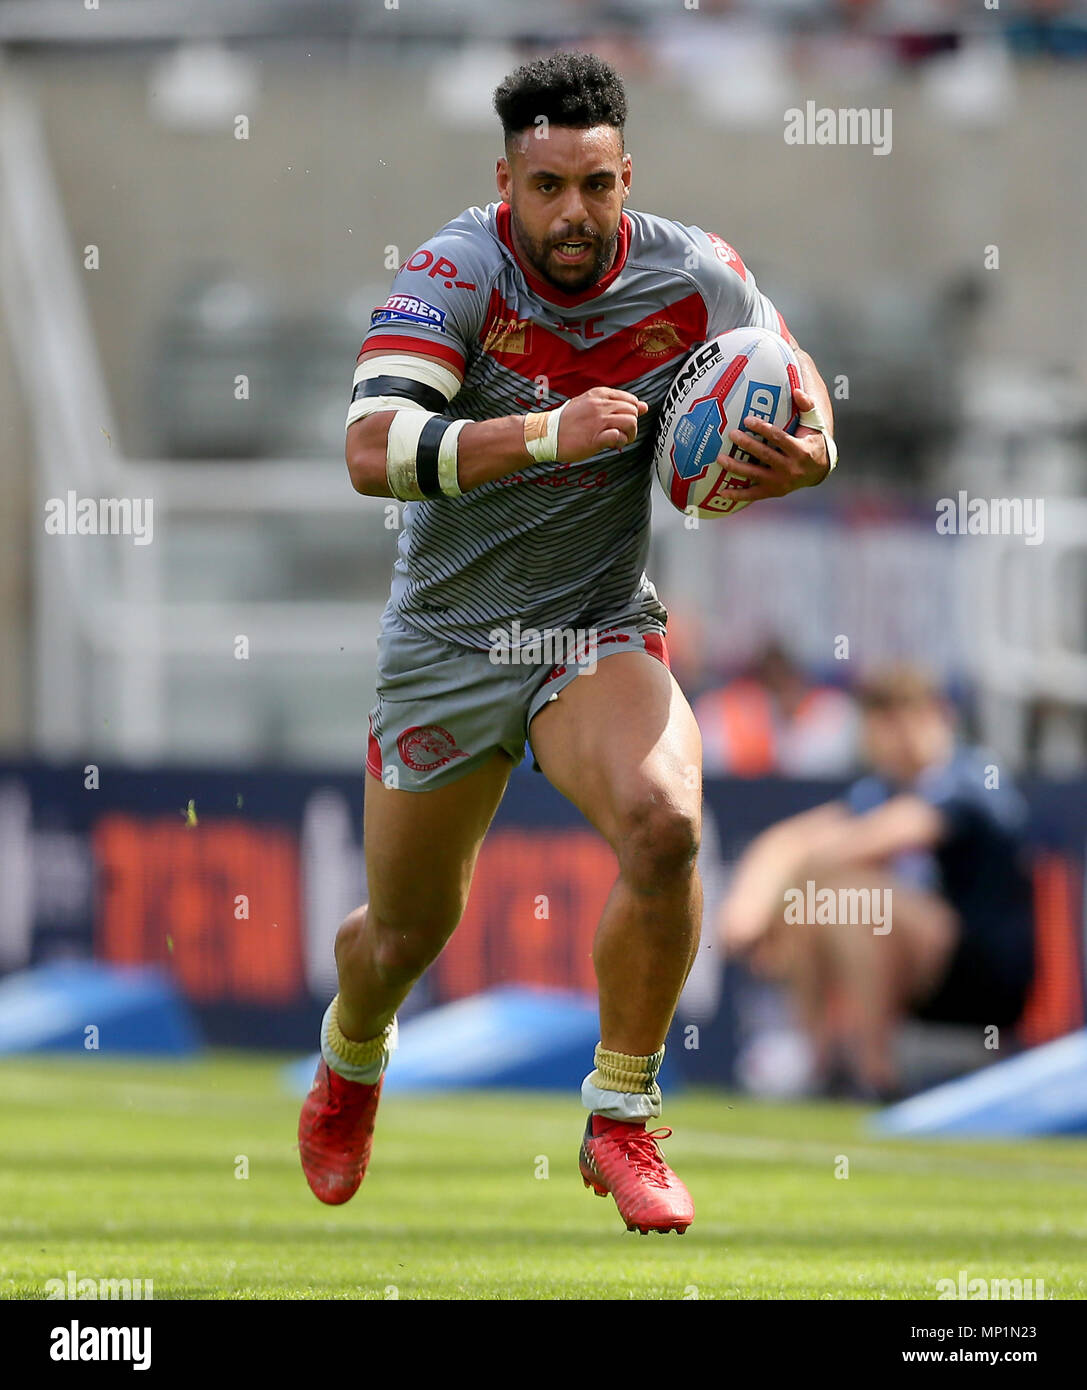 Catalan Dragons Jodie Broughton in action during the Betfred Super League, Magic Weekend match at St James' Park, Newcastle. PRESS ASSOCIATION Photo. Picture date: Sunday May 20, 2018. See PA story RUGBYL Salford. Photo credit should read: Richard Sellers/PA Wire. RESTRICTIONS: Editorial use only. No commercial use. No false commercial association. No video emulation. No manipulation of images. Stock Photo